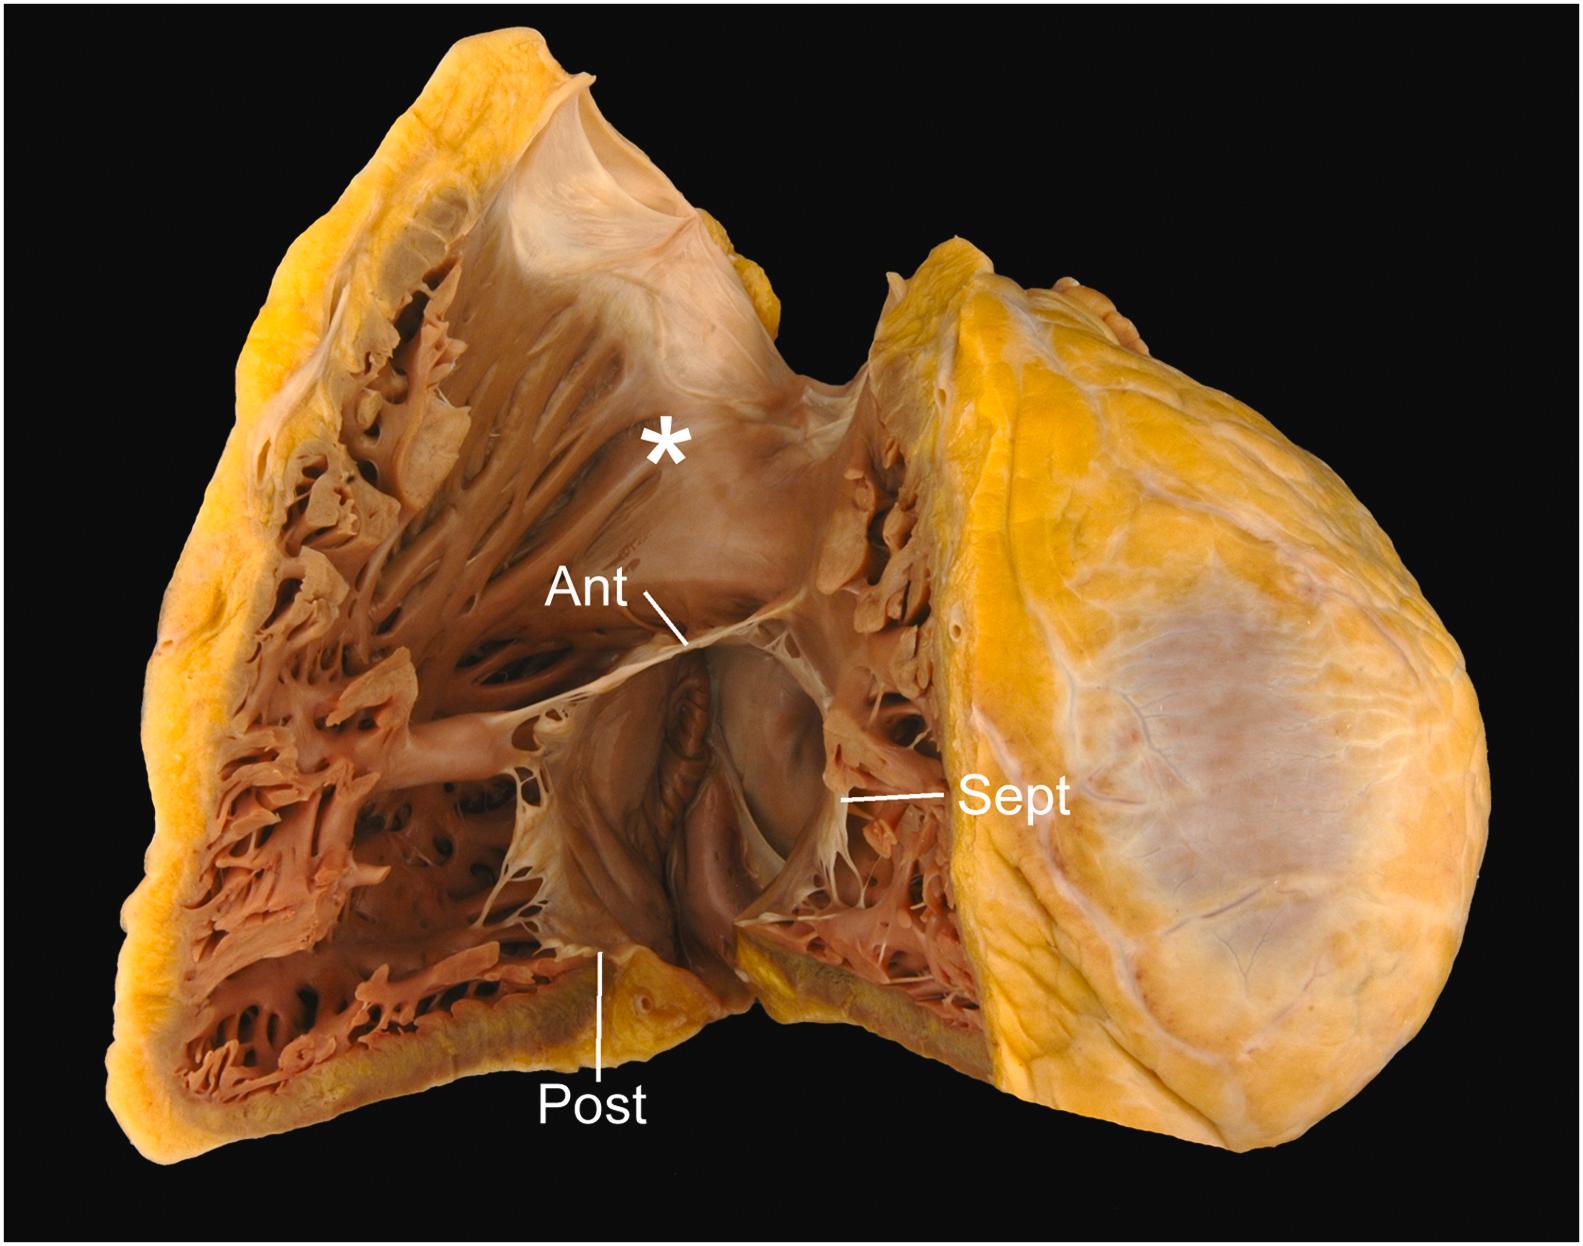 Figure 2.7, Internal anatomy of the right ventricle. The right ventricle, opened along the inflow and outflow portions exhibits the three tricuspid valve leaflets ( Ant , anterior tricuspid valve leaflet; Post , posterior tricuspid valve leaflet; Sept , septal tricuspid valve leaflet). The course apical trabeculations, septal cordal attachments, and the muscular outflow tract (asterisk) serve as morphologic differentiators from the left ventricle.